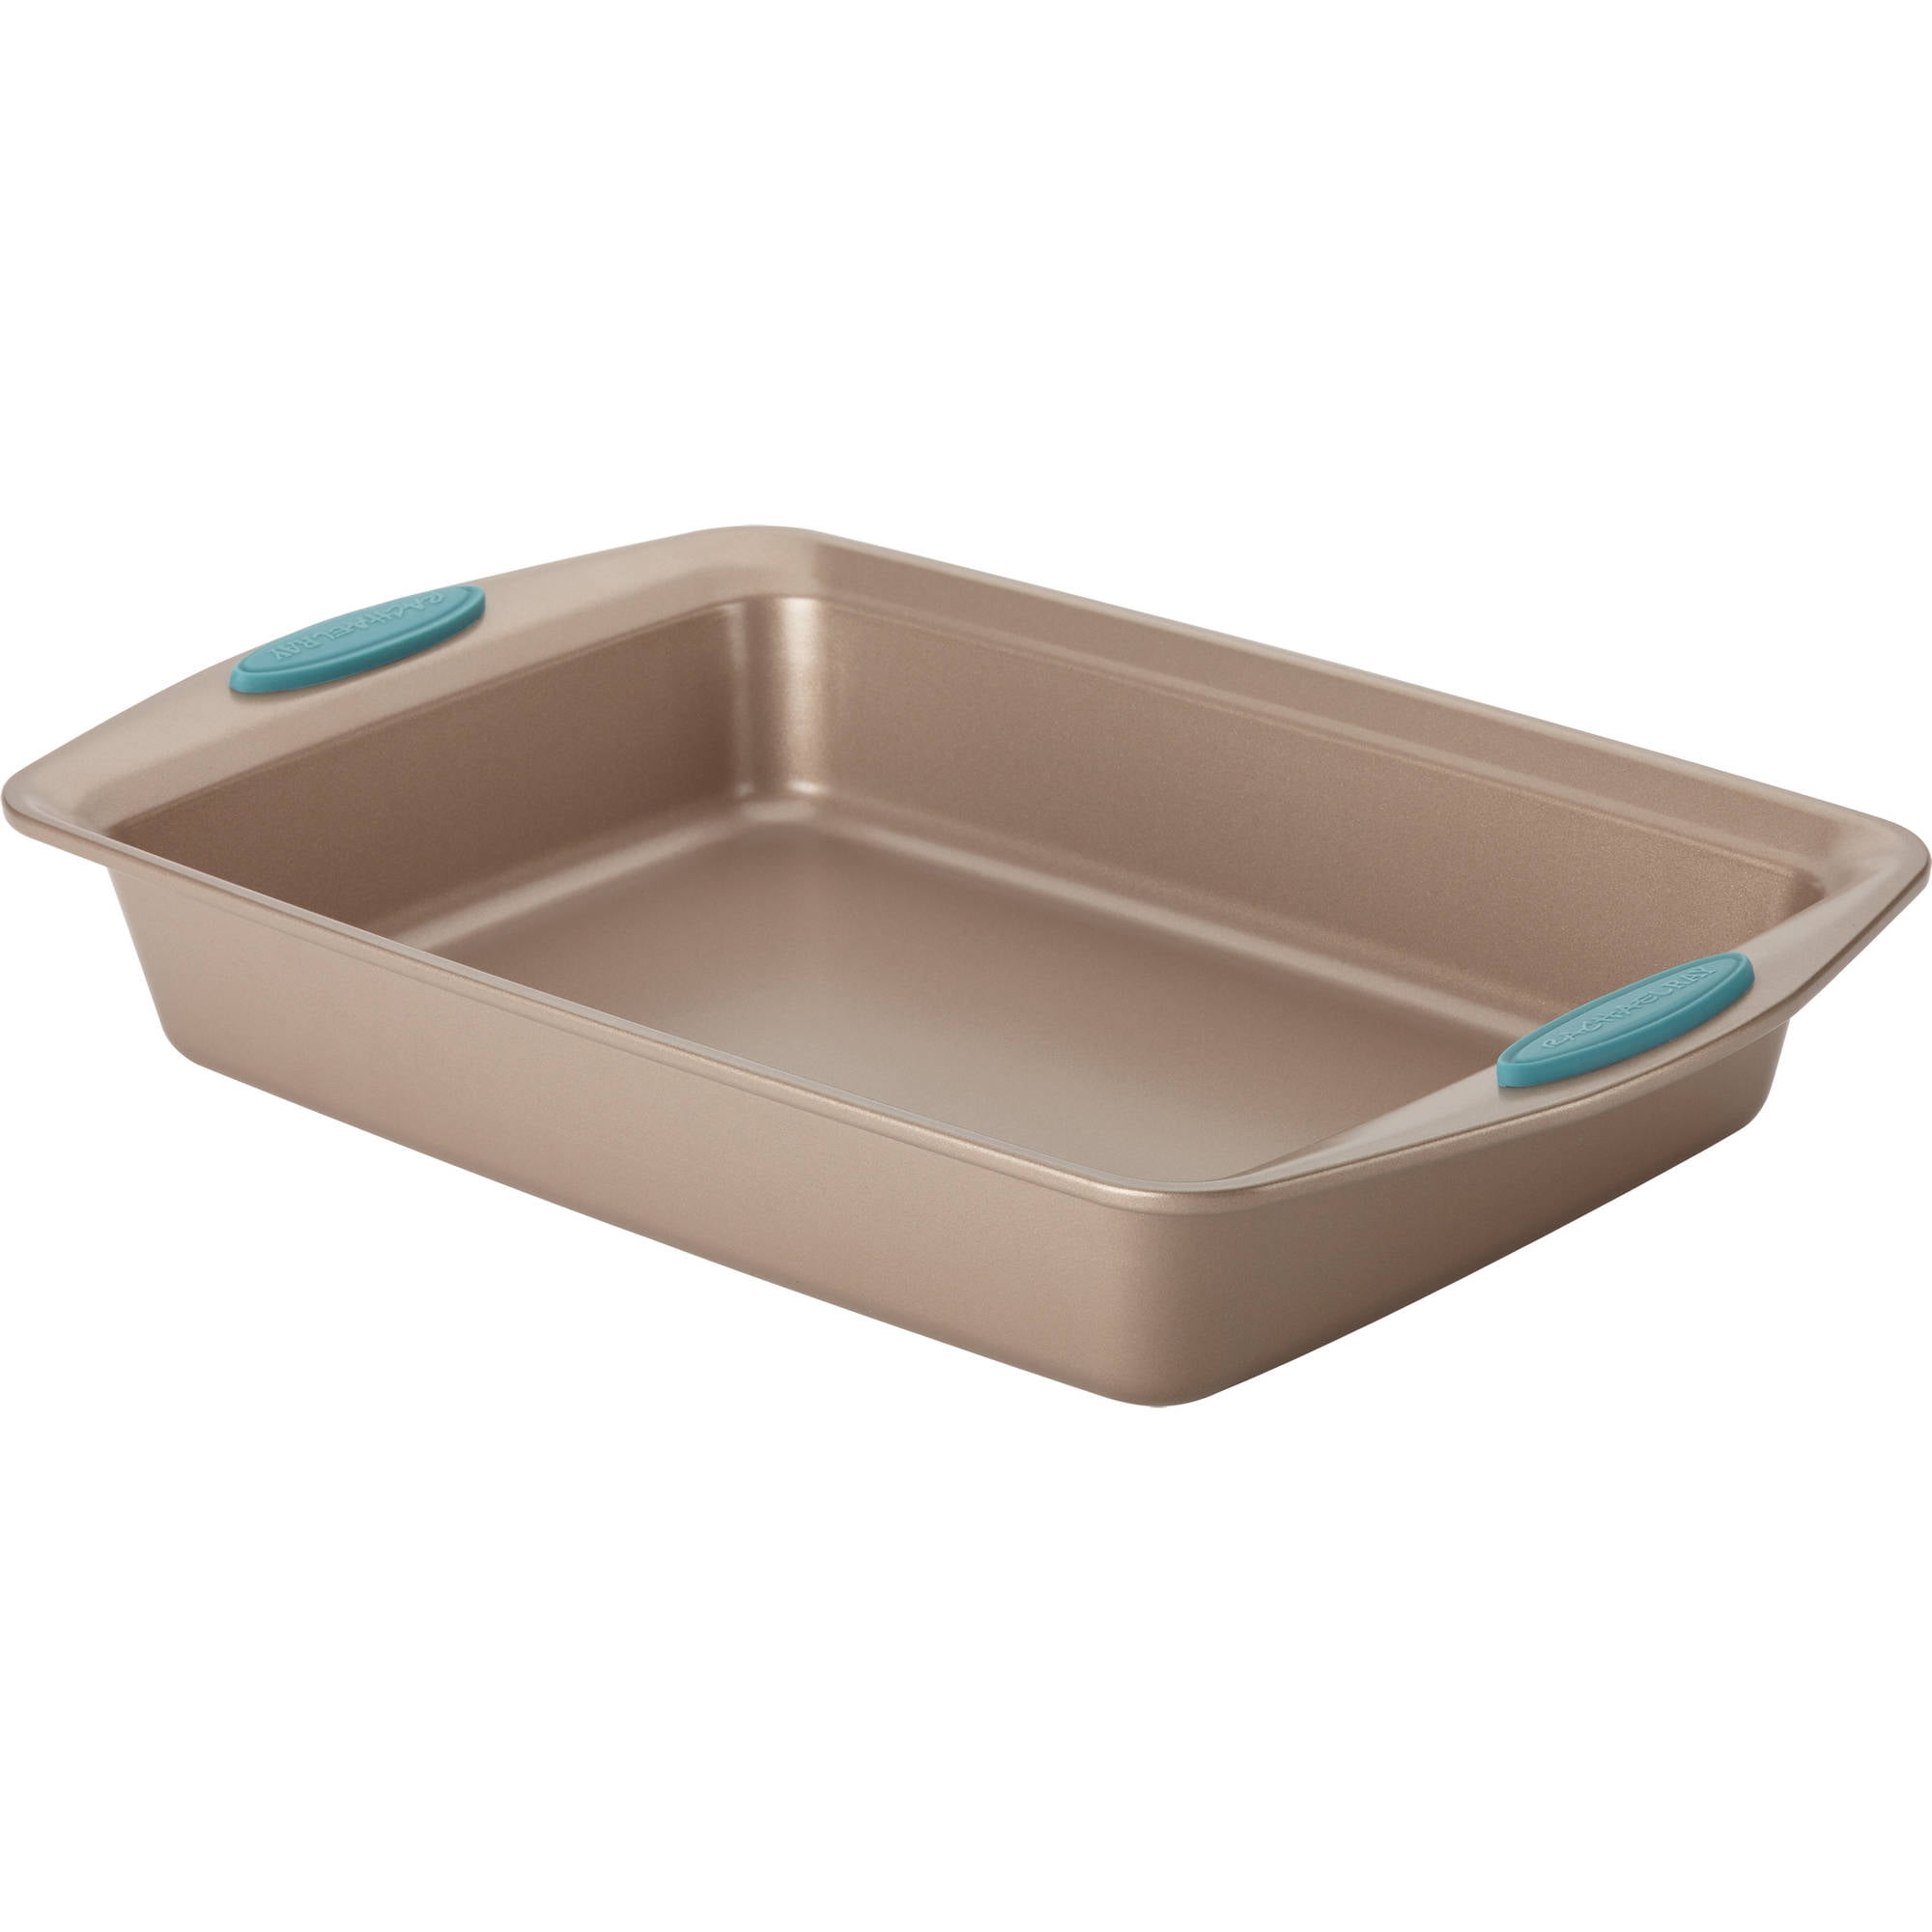 Rachael Ray Cucina Nonstick Bakeware Pans, Latte Brown with Agave Blue Handle Grips